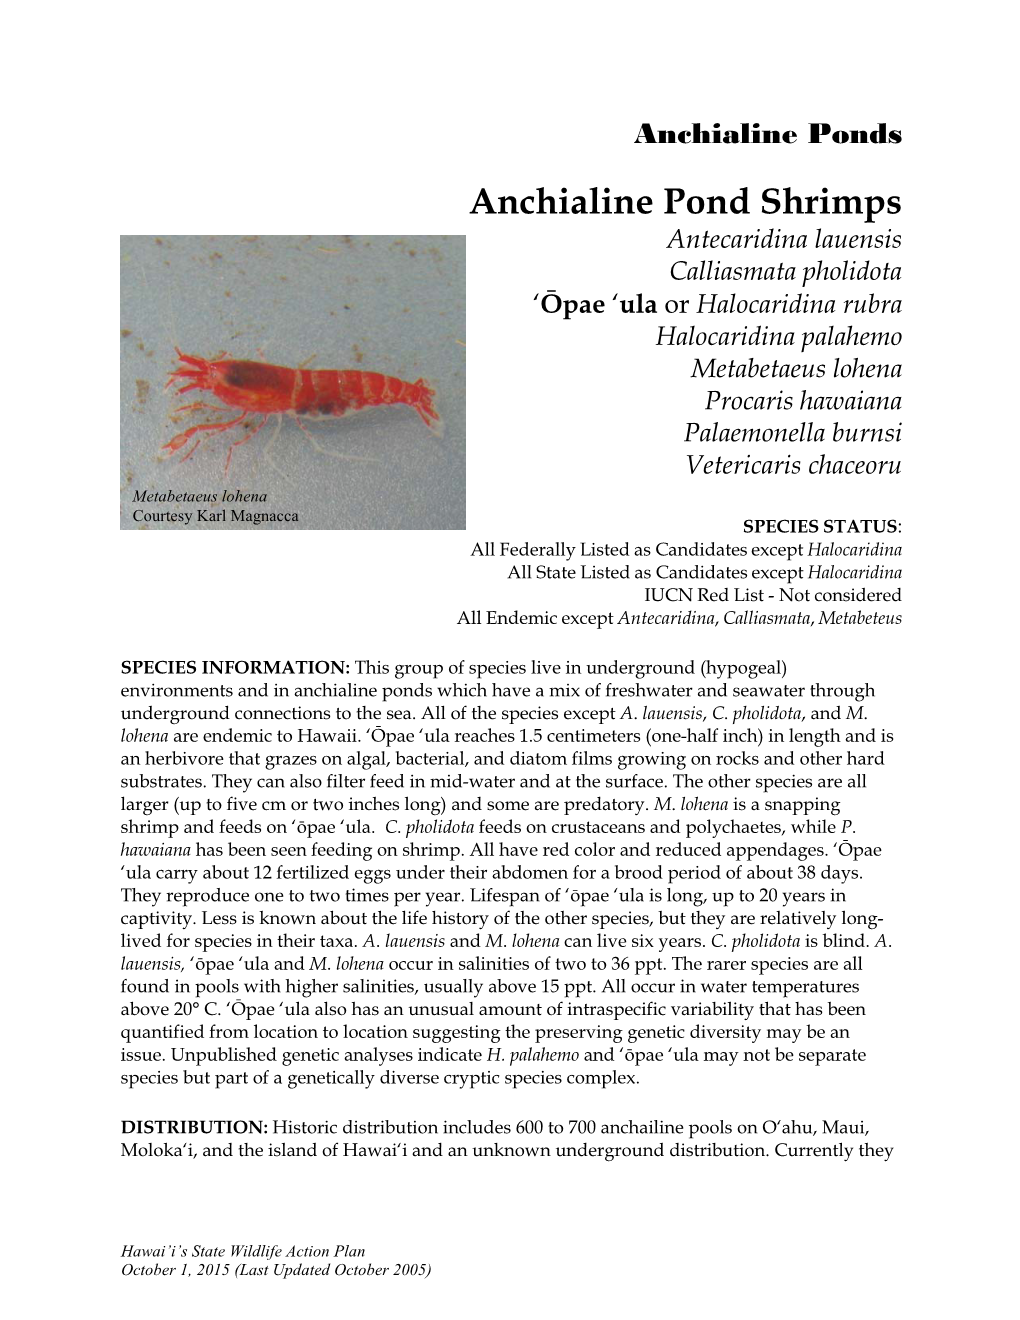 Anchialine Shrimps in the Waikolao Area Has Been Constant, Except for Increases in ‘Ōpae ‘Ula Abundance Since 1996